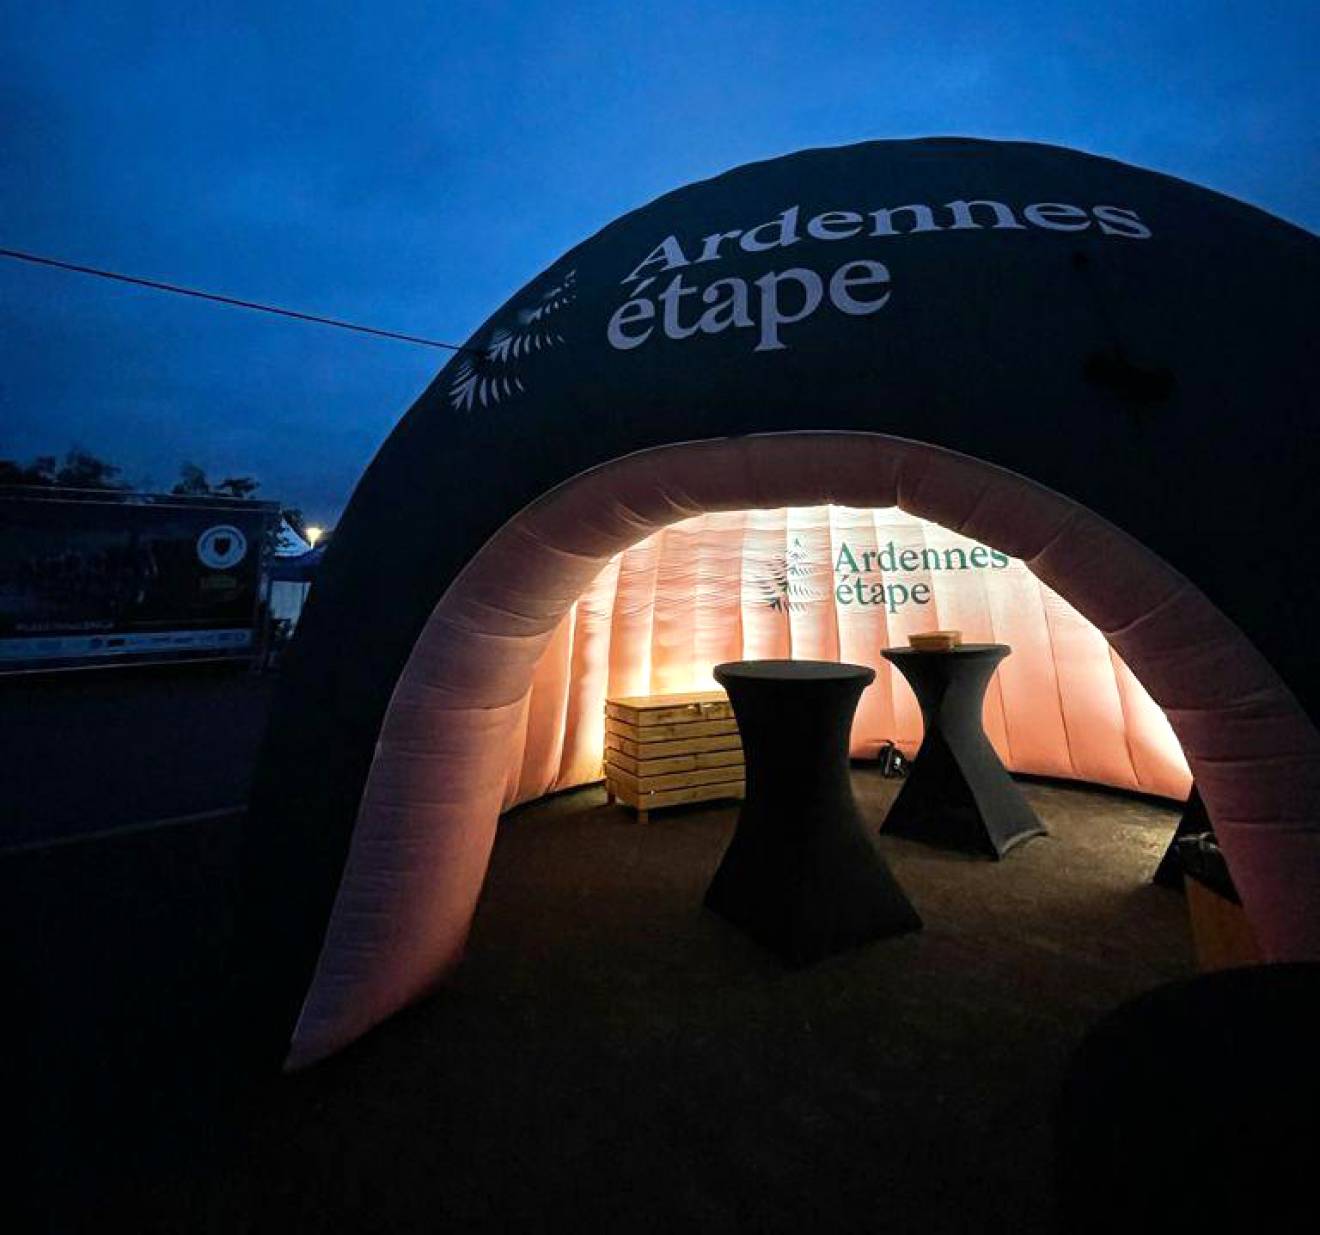 Giant inflatable stands Ardennes étape, tent, igloo, Inflatable stand X-Treme Creations